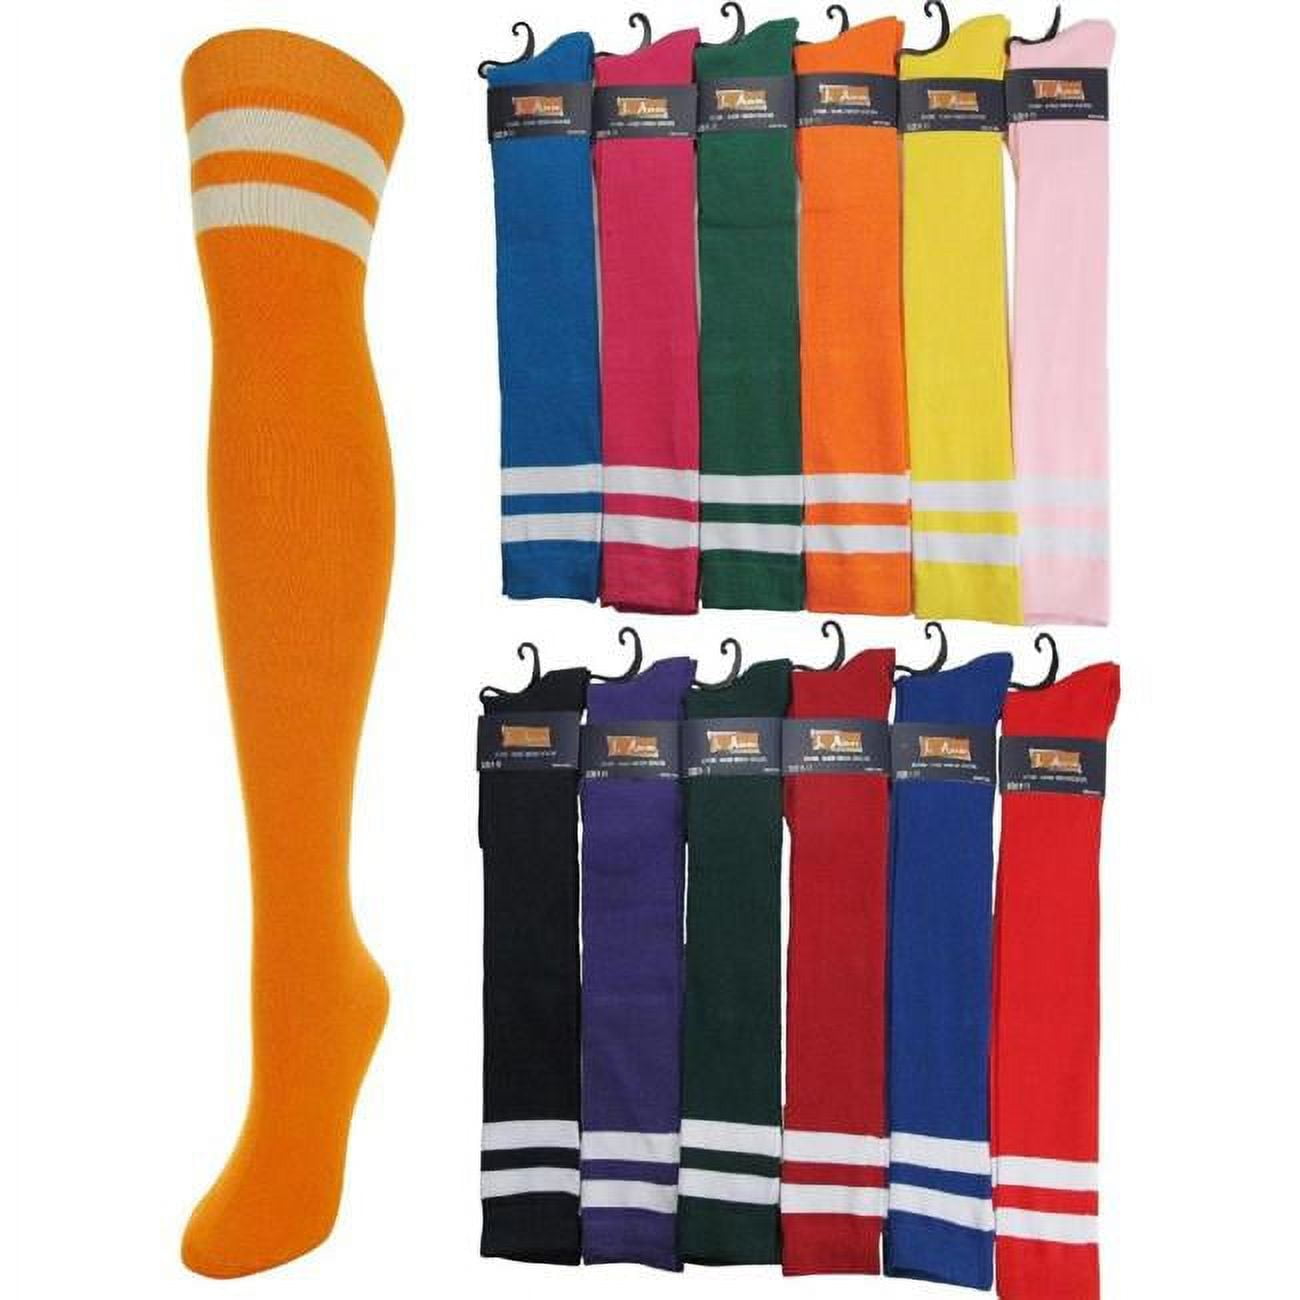 Size 9-11 Womens Over Knee High Socks, Assorted Color - Pack Of 36